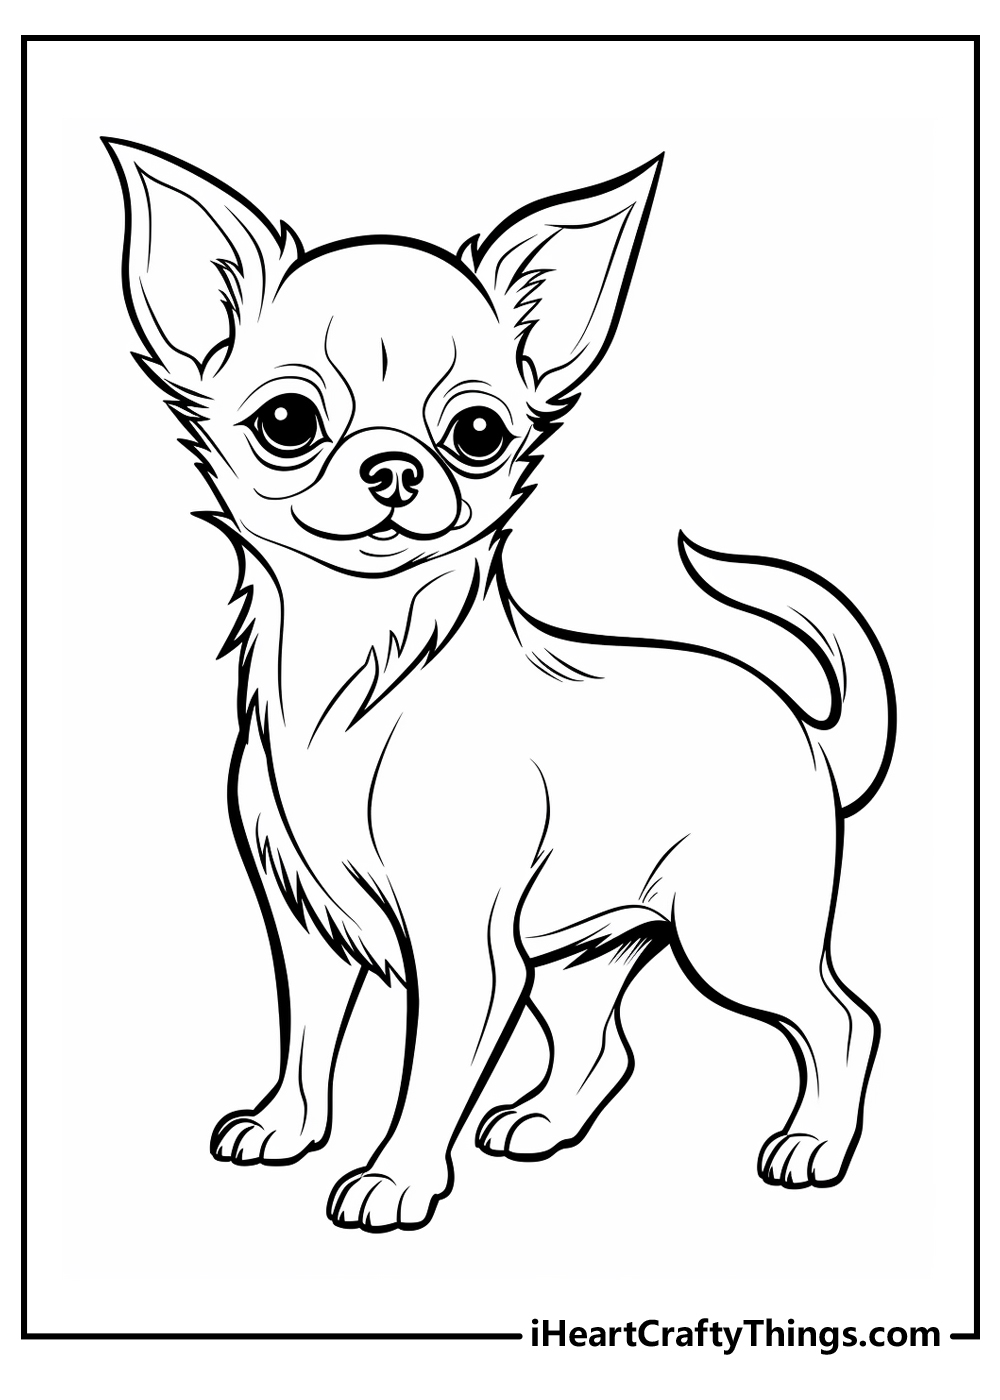 black-and-white chihuahua coloring sheet